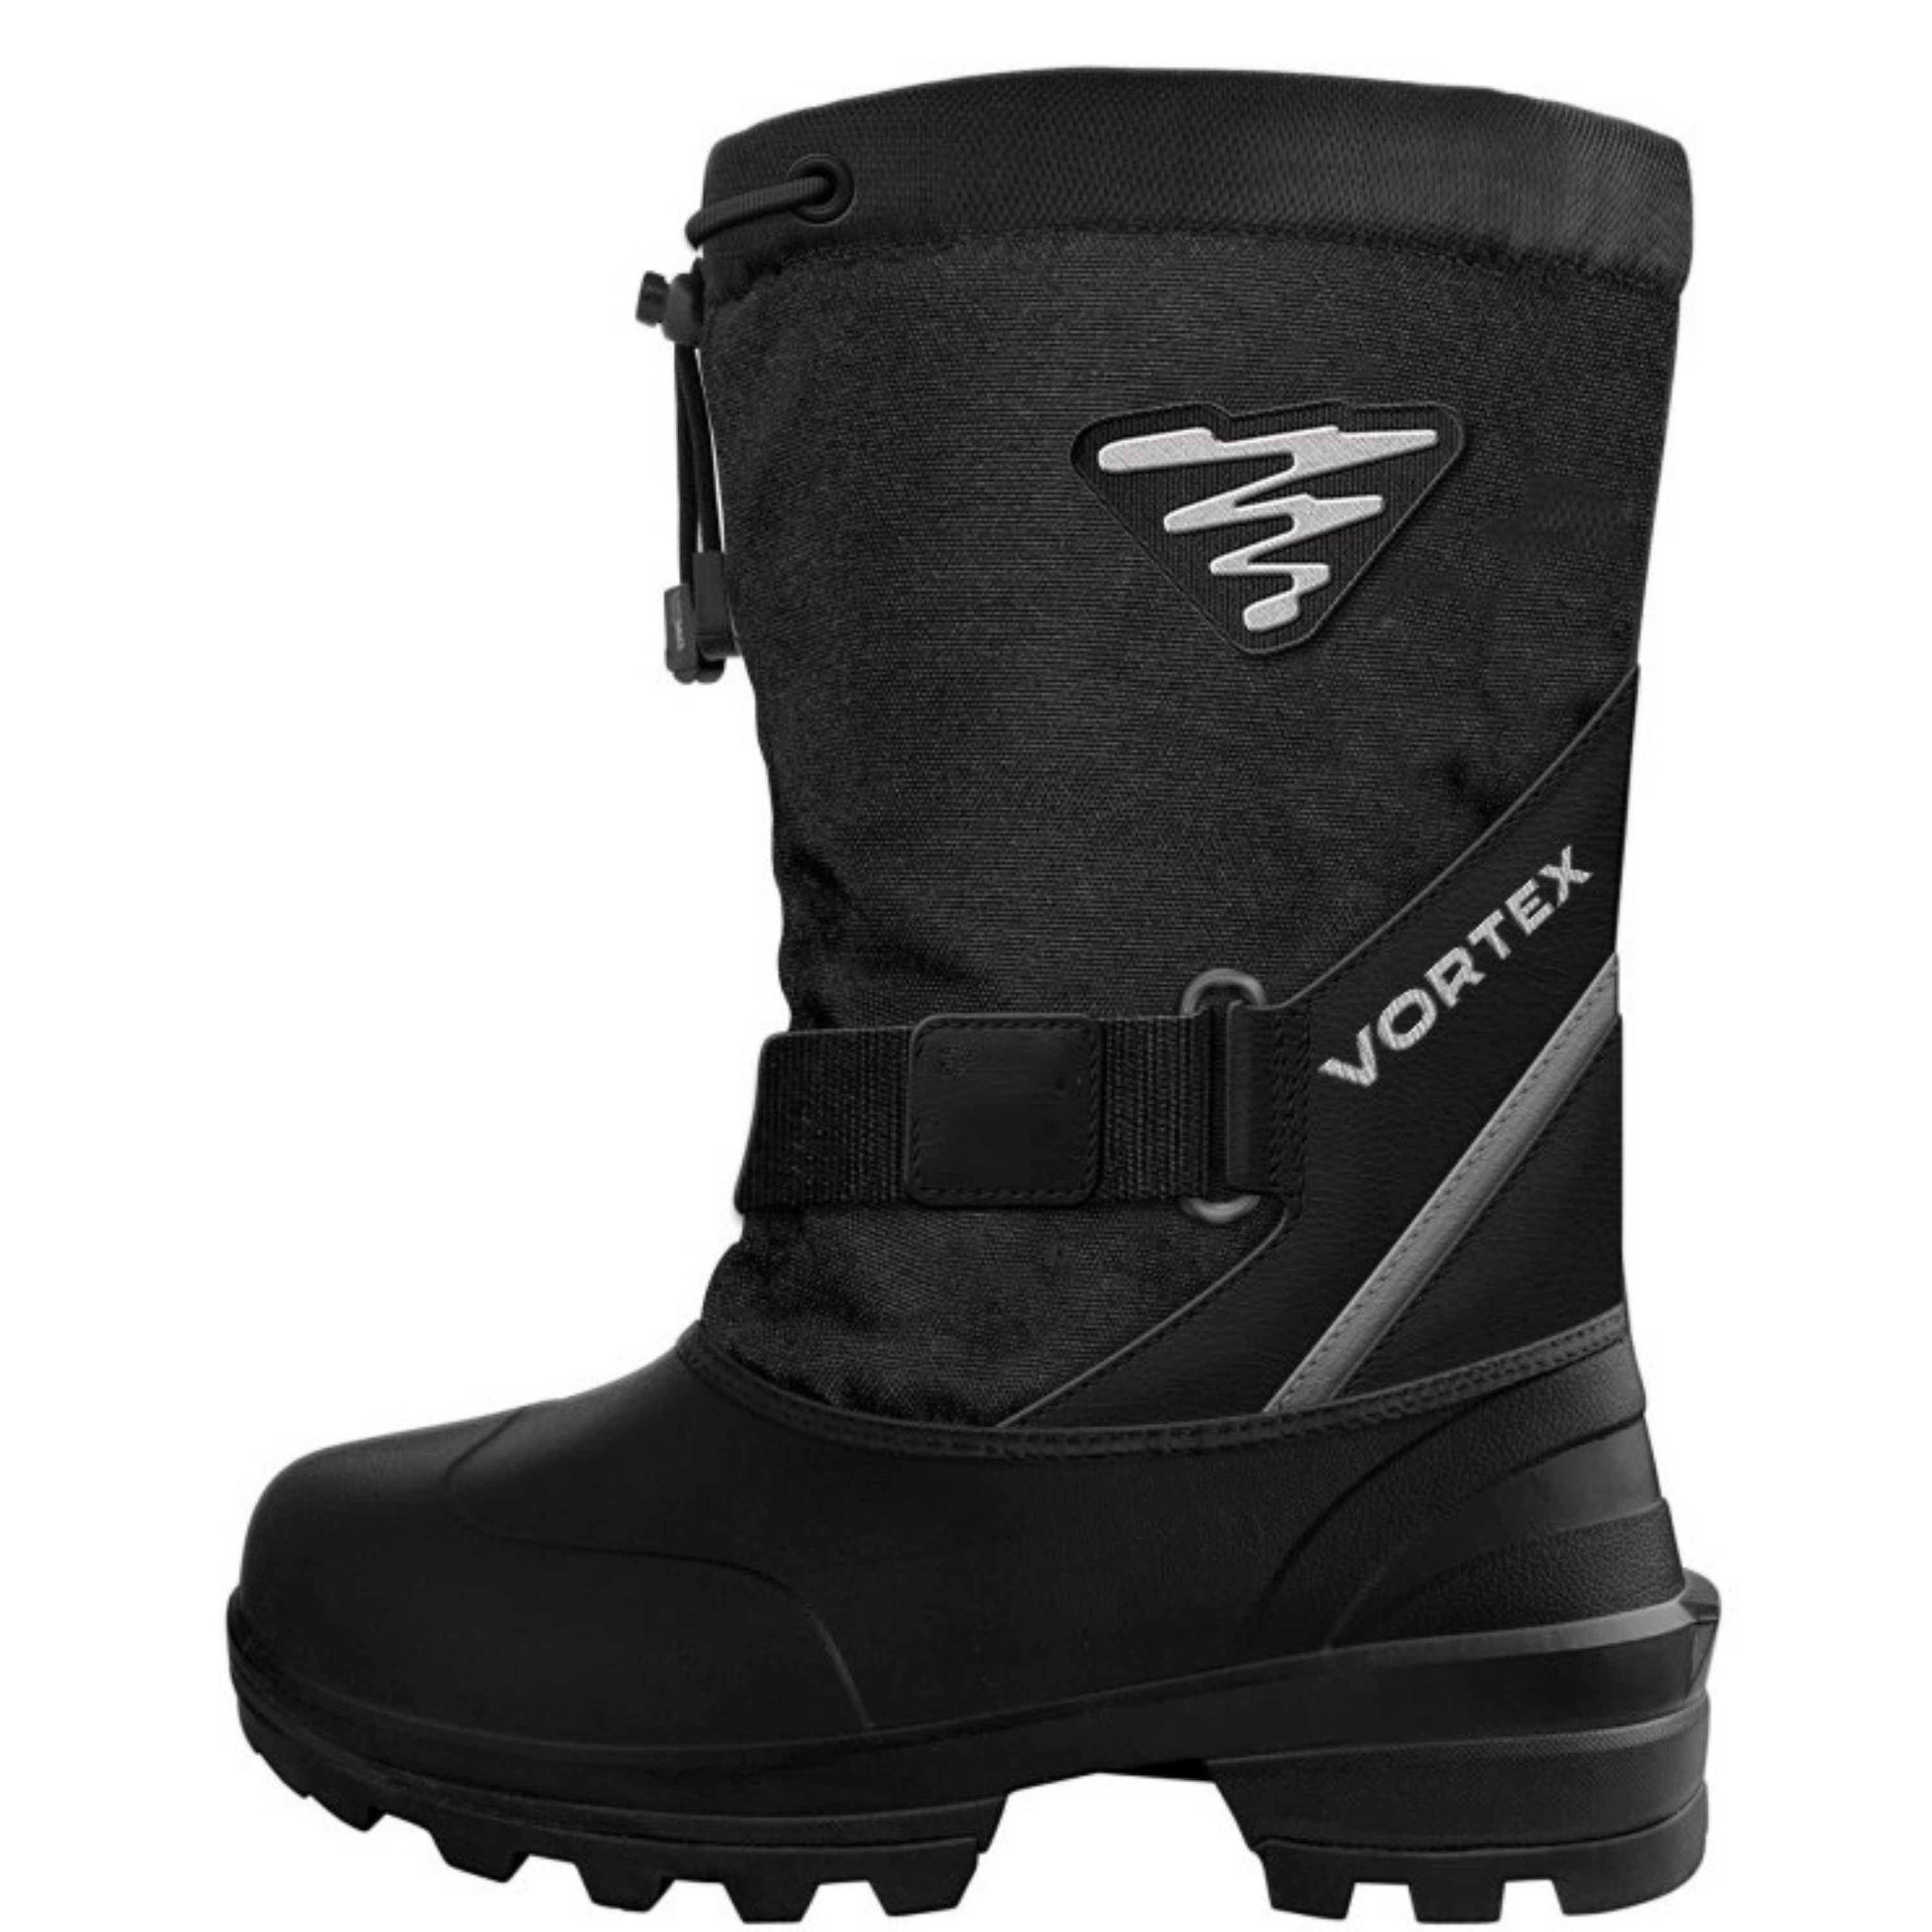 "Storm" Winter boots - Adult's